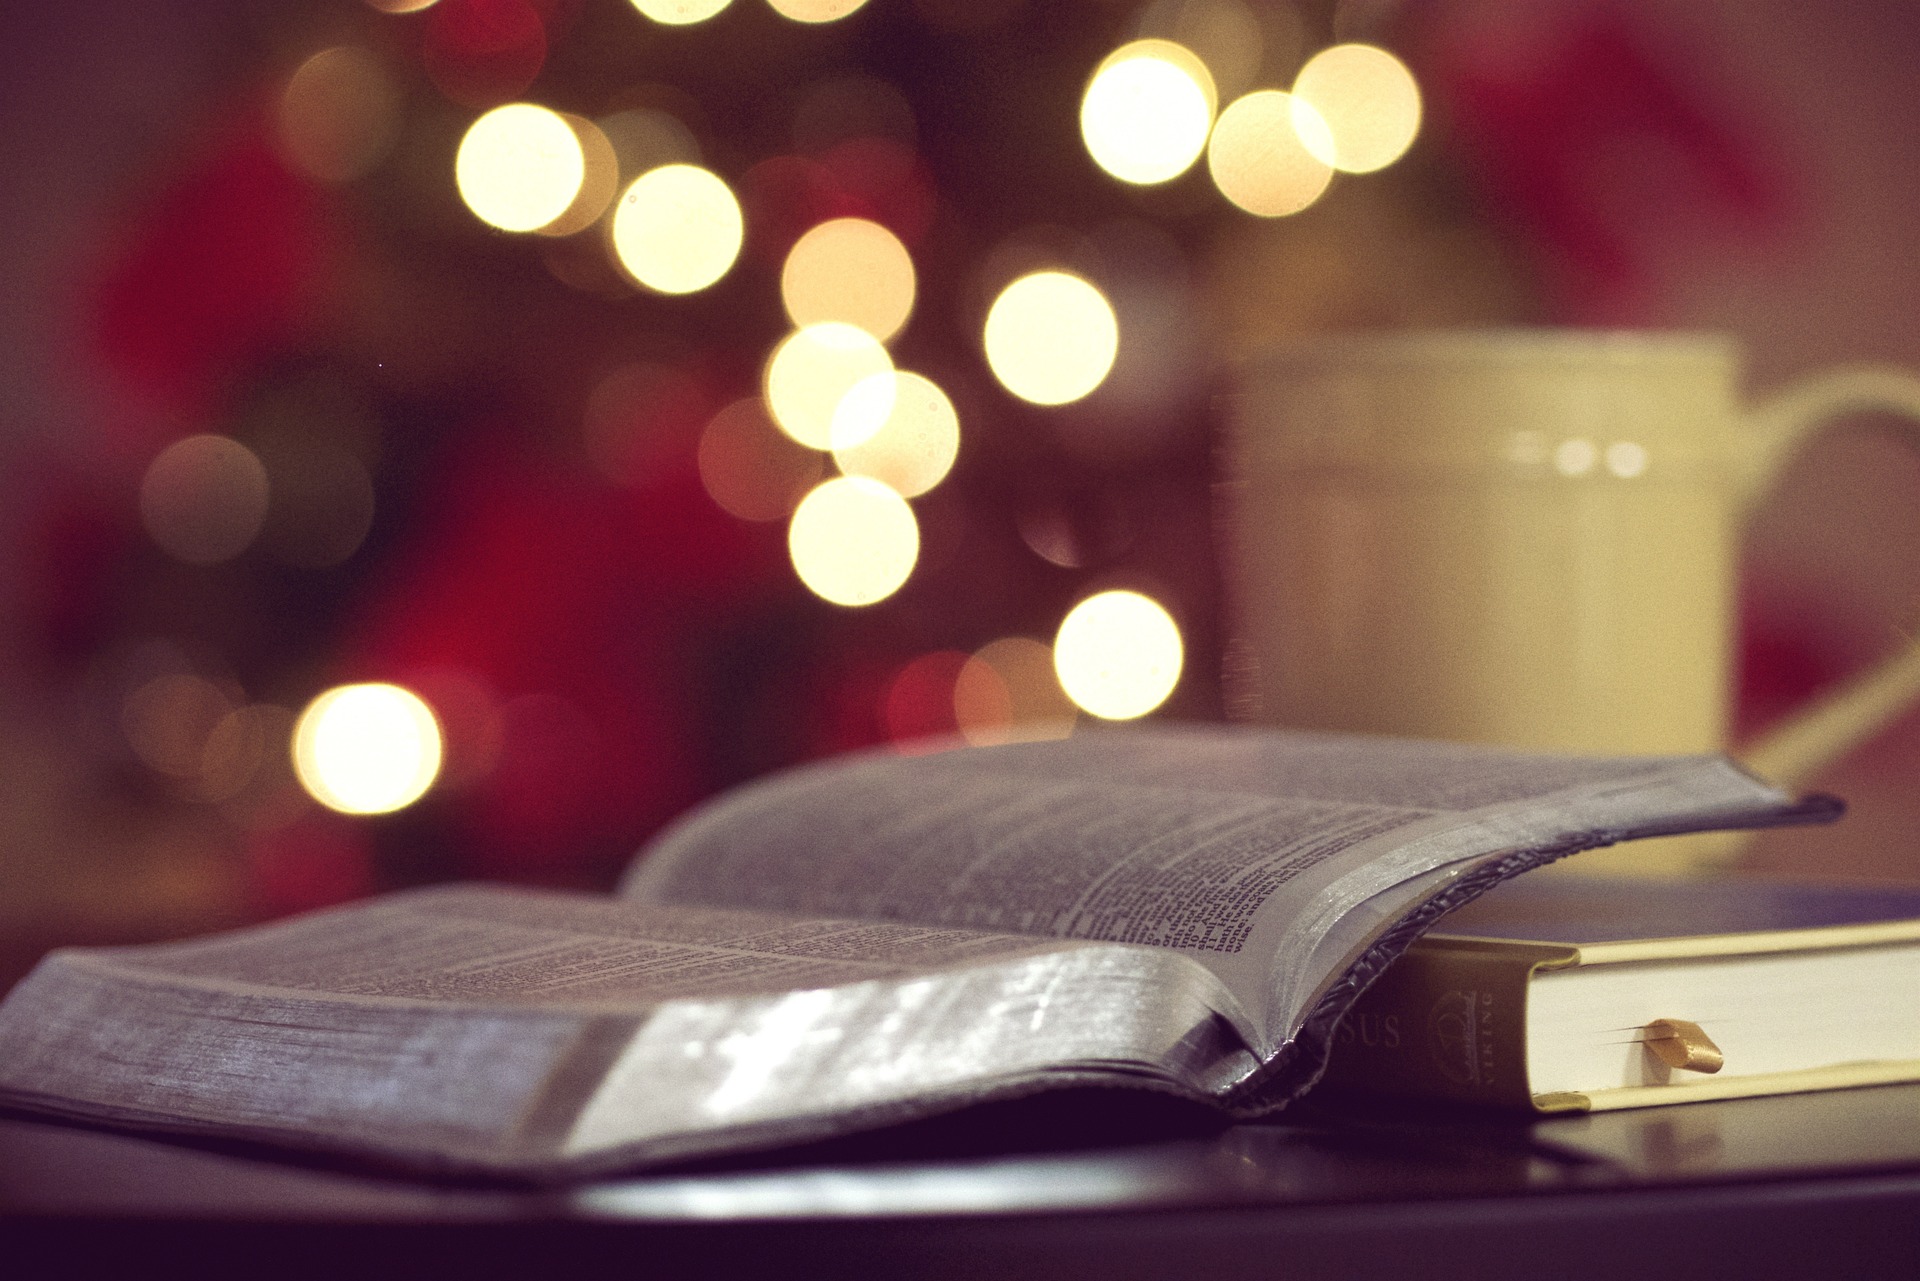 a blurry background with an open Bible in the forefront and a closed book underneath one side of the cover with a blurry yellow mug on the back right side of the image